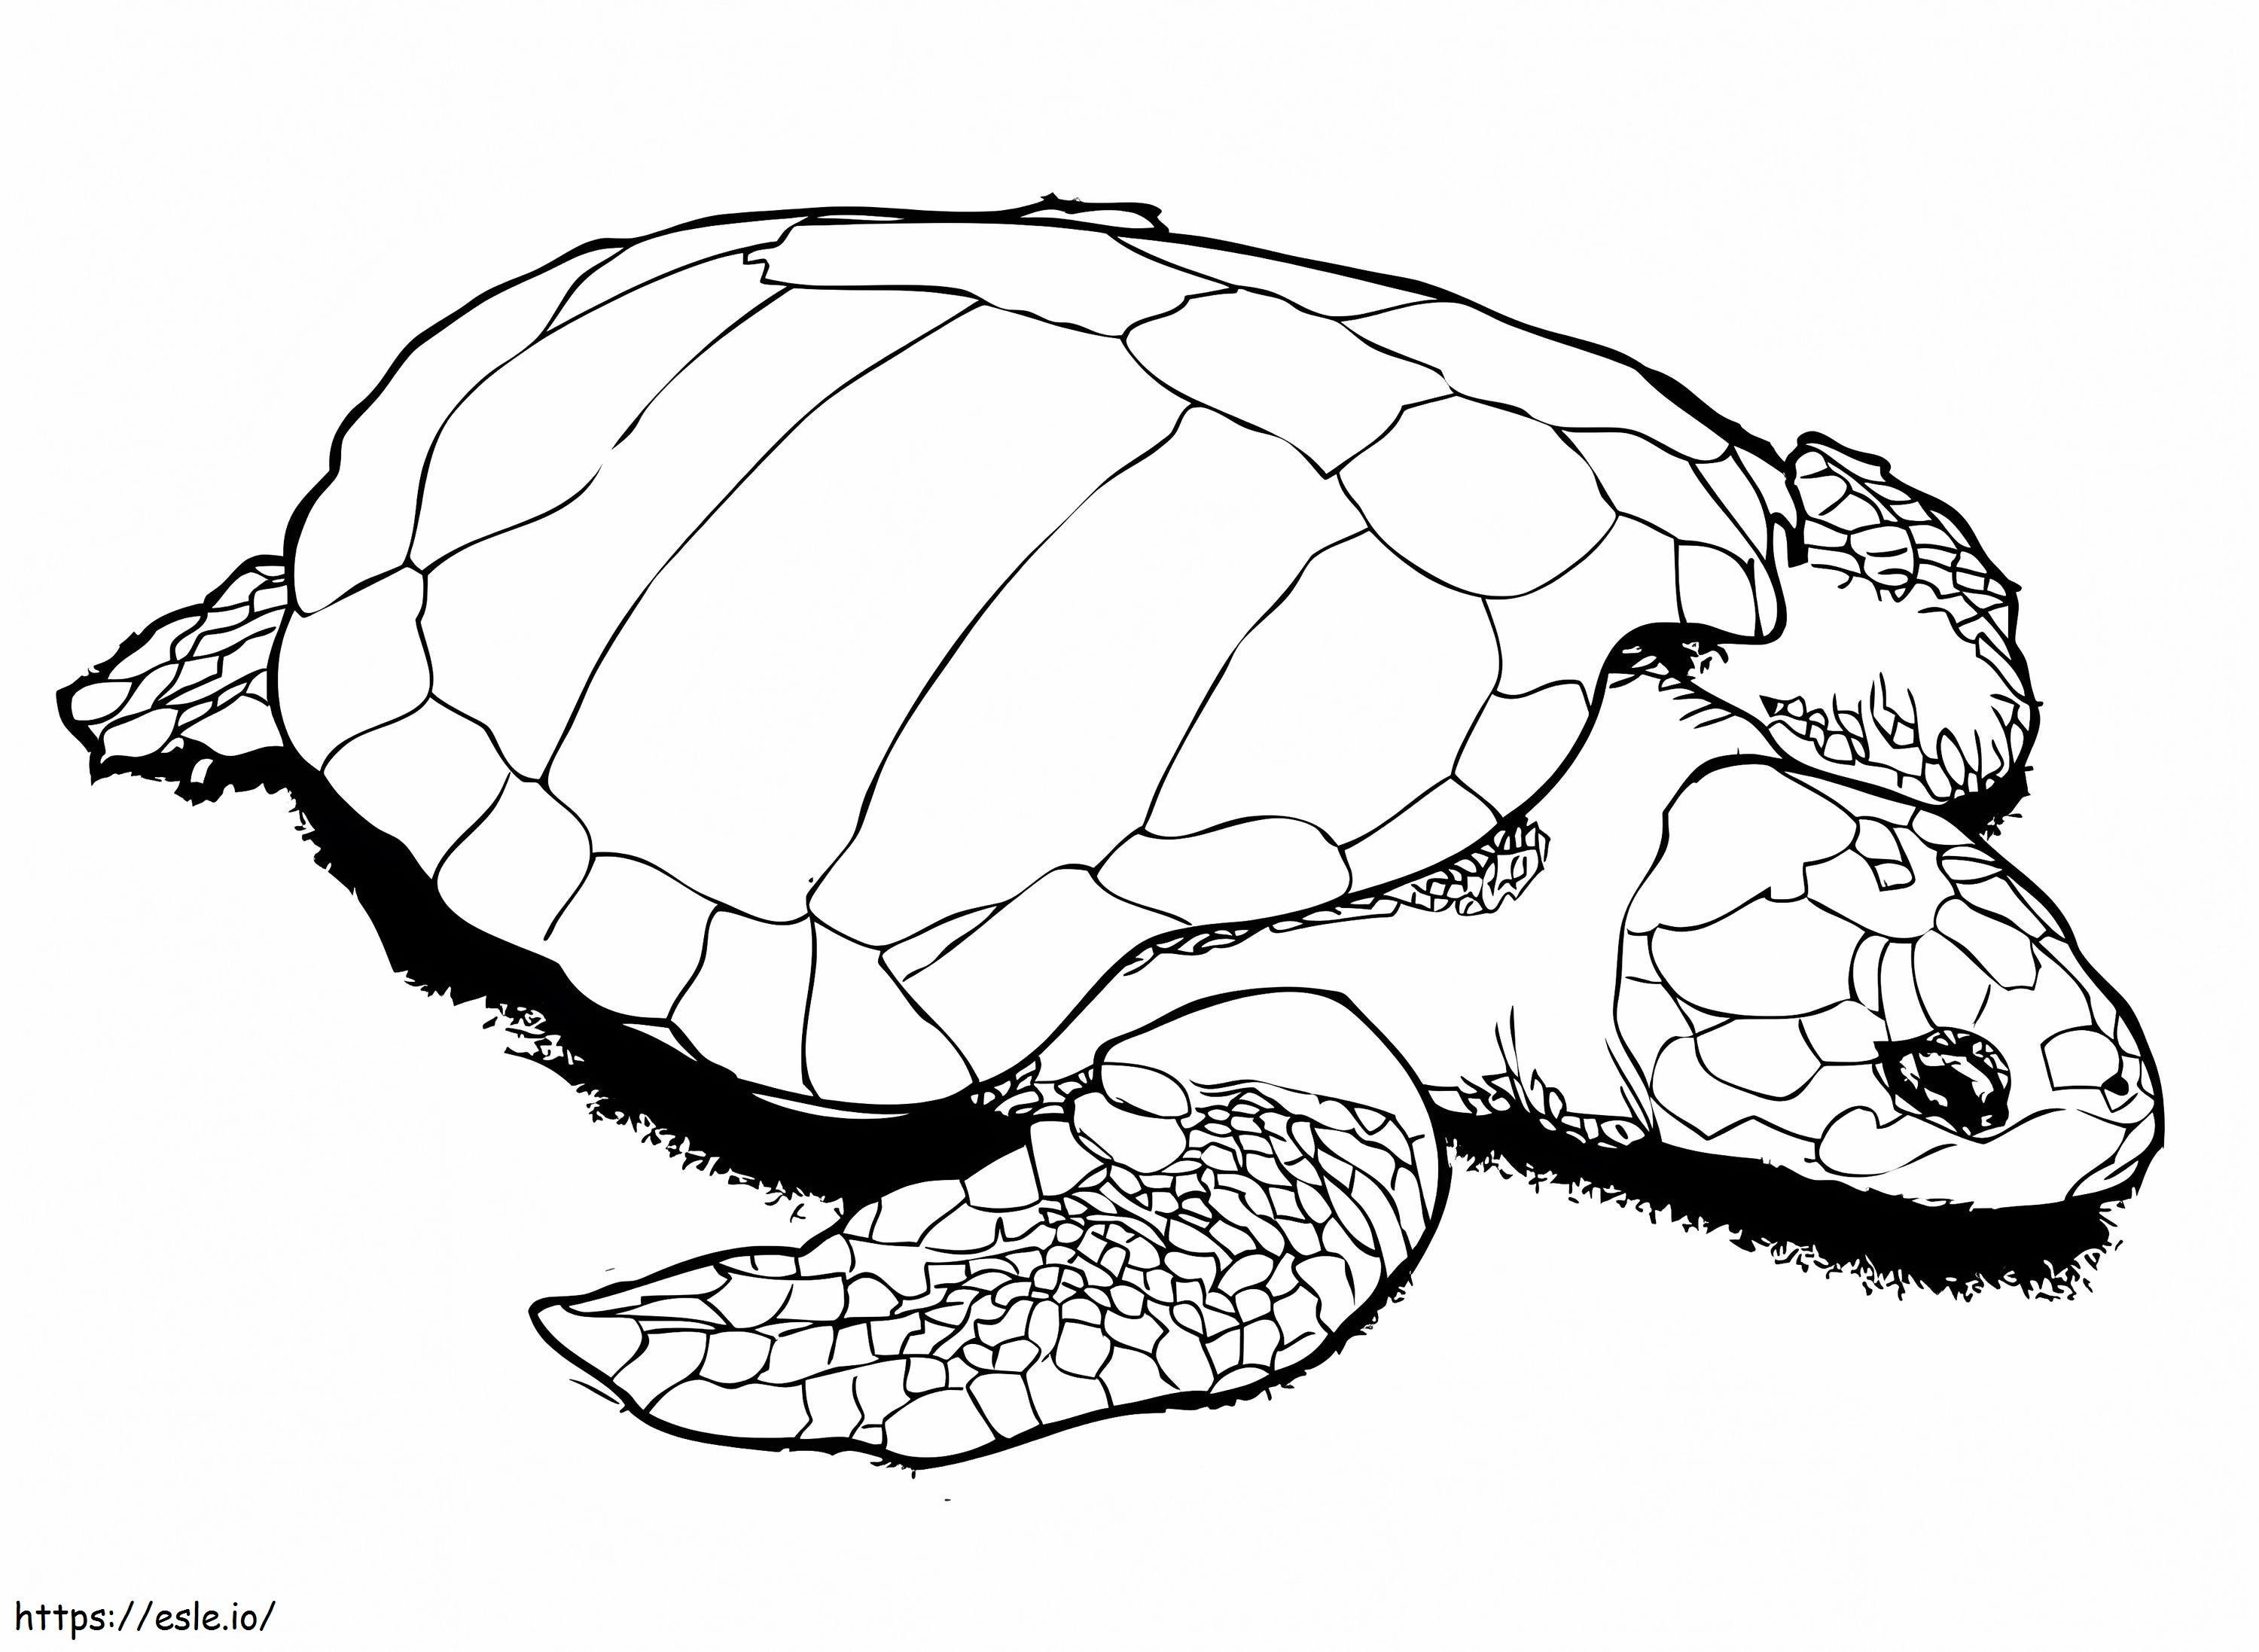 A Olive Ridley Sea Turtle coloring page